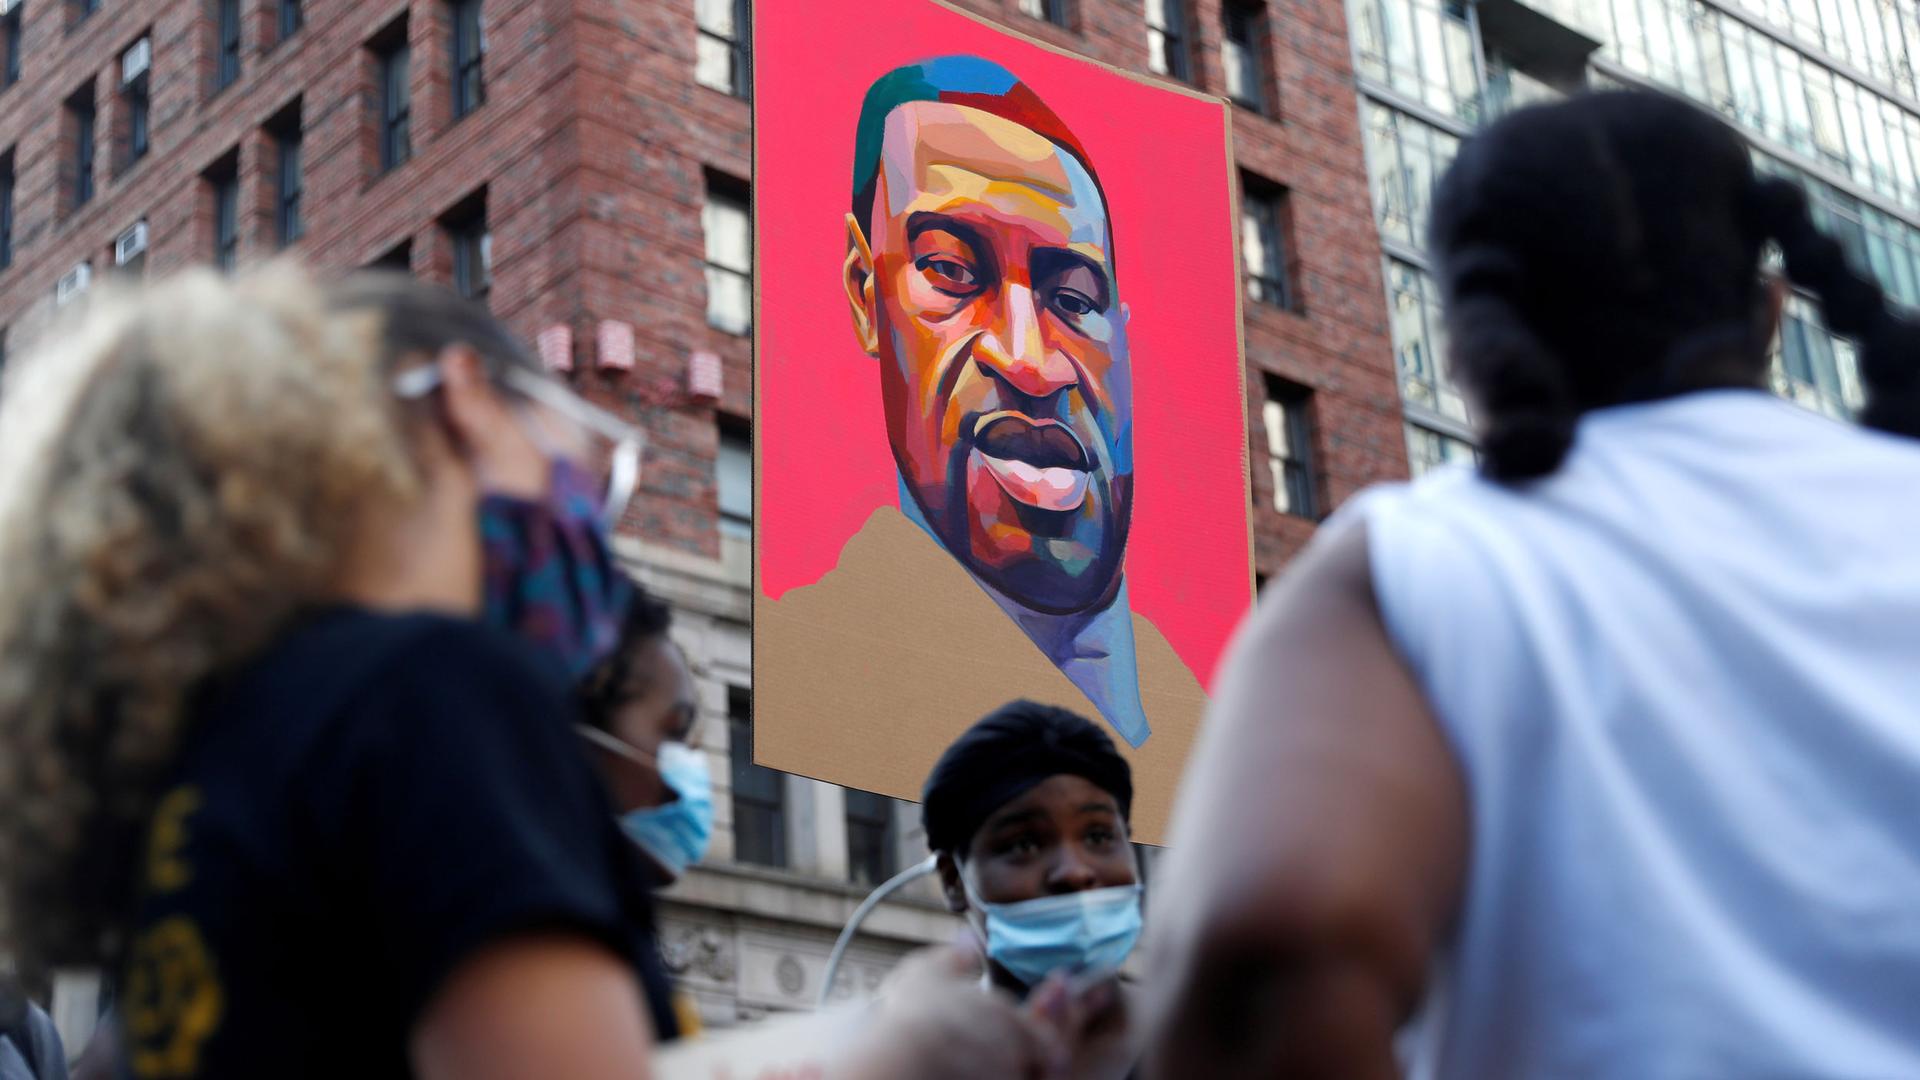 A portrait of George Floyd is seen hanging in the background as demonstrators in the near ground are in soft focus.